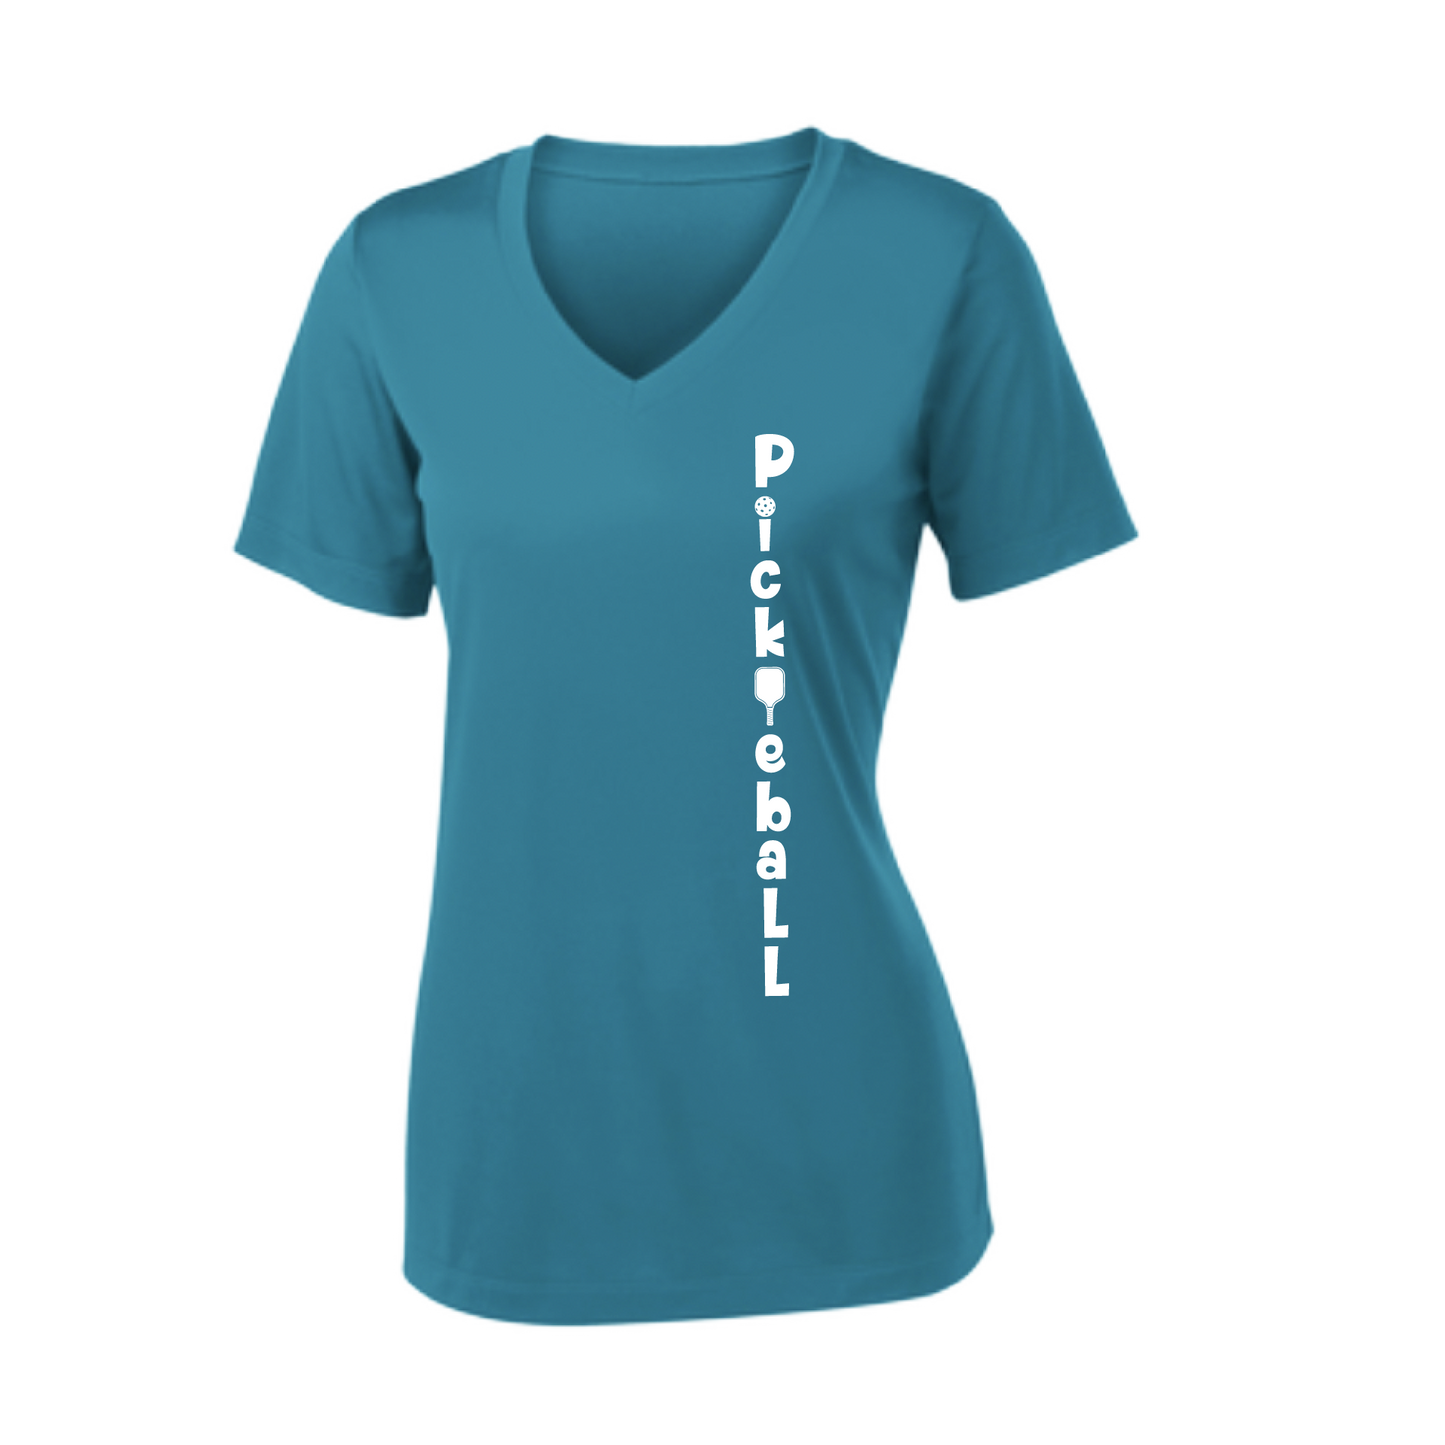 Pickleball Design: Pickleball Vertical Customizable Location  Women's Style: Short-Sleeve V-Neck  Shirts are lightweight, roomy and highly breathable. These moisture-wicking shirts are designed for athletic performance. They feature PosiCharge technology to lock in color and prevent logos from fading. Removable tag and set-in sleeves for comfort.